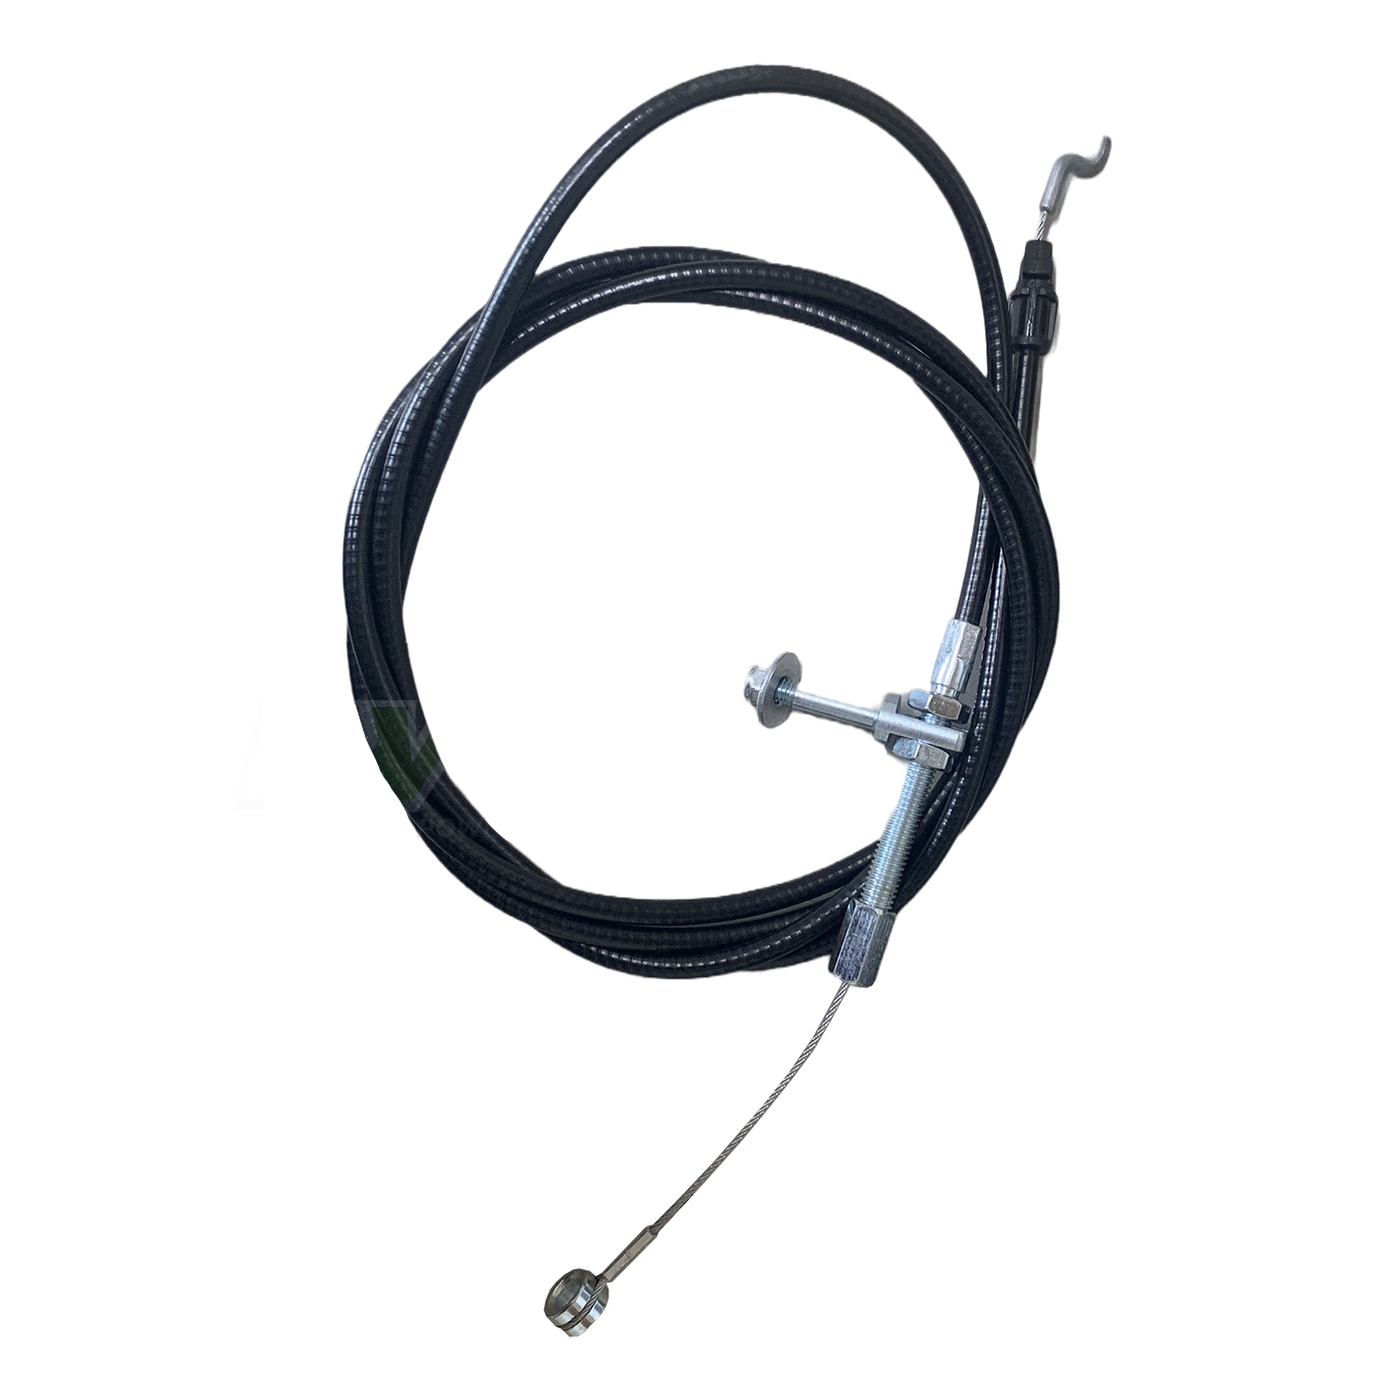 Victa Commercial 21" Self-Propelled Clutch-Cable 80095464